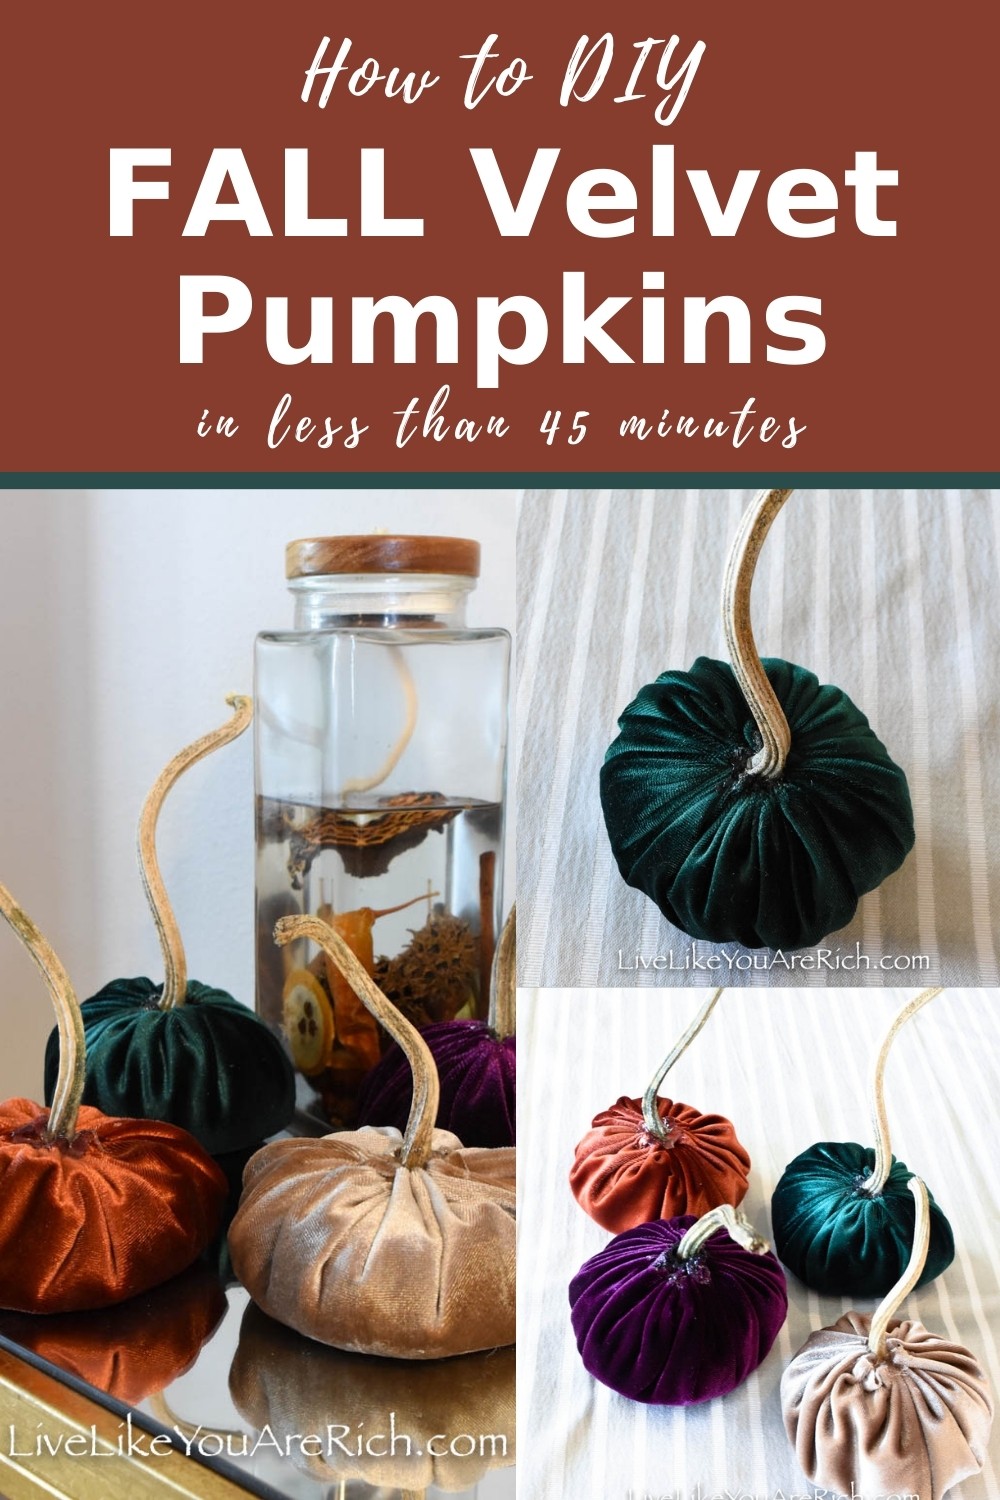 Looking for fun craft to make with your kids? These DIY Fall velvet pumpkins are inexpensive and simple to make. My six year old daughter and I put them together in less than 45 minutes. This would make such a group craft and also a fun craft to make with kids. #fall #fallcraft #pumpkin